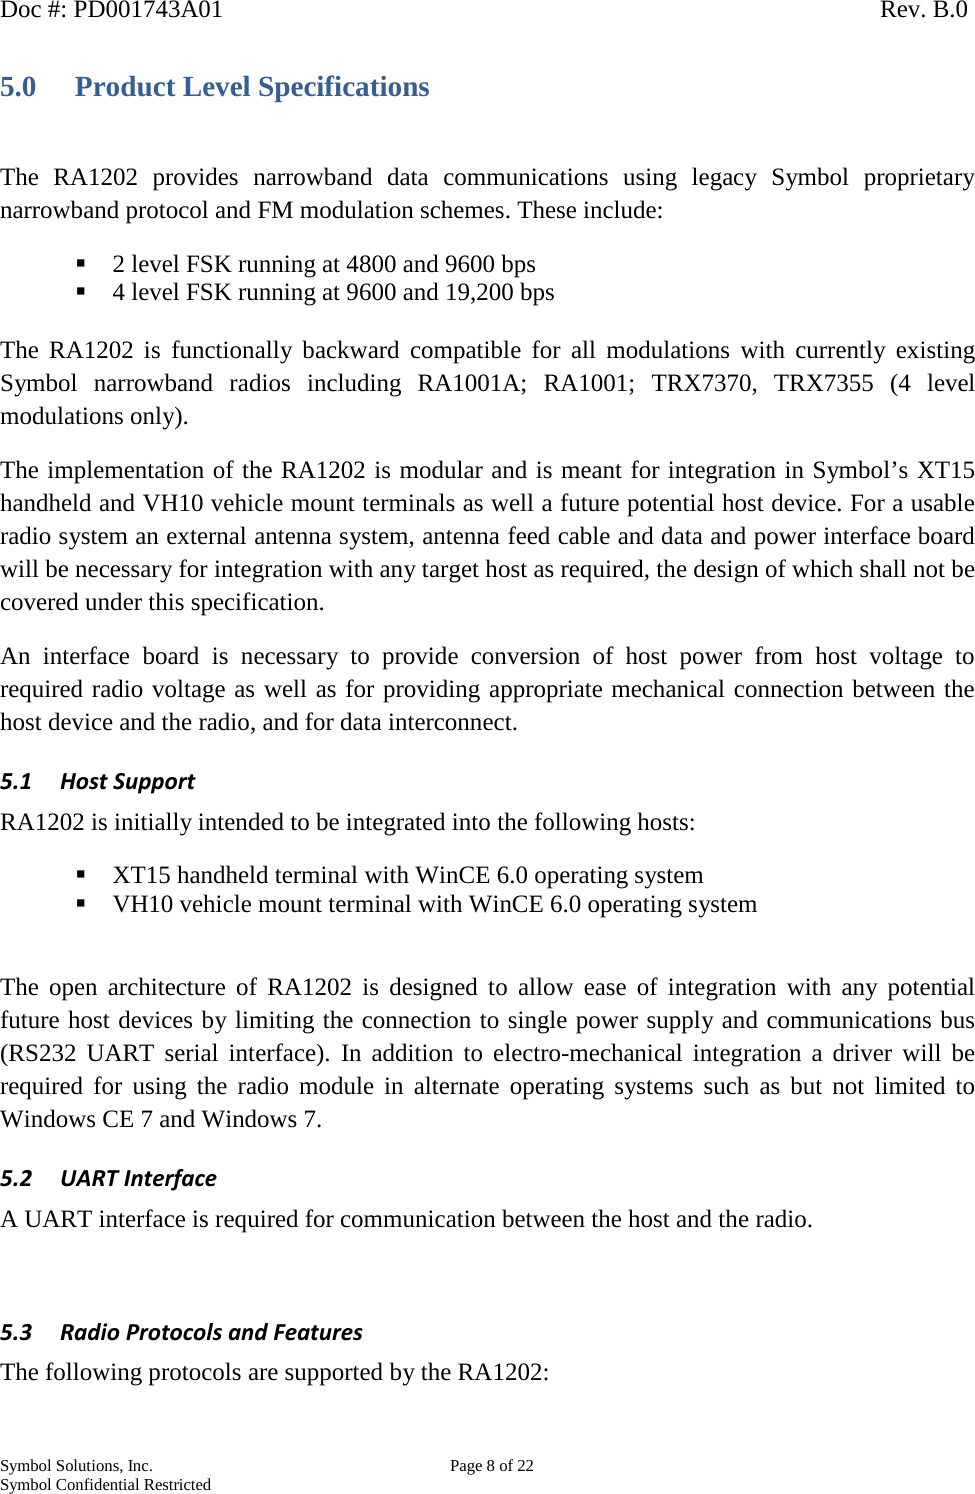 Doc #: PD001743A01                                                                                                         Rev. B.0 Symbol Solutions, Inc.    Page 8 of 22 Symbol Confidential Restricted   5.0 Product Level Specifications  The RA1202 provides narrowband data communications using legacy Symbol  proprietary narrowband protocol and FM modulation schemes. These include:  2 level FSK running at 4800 and 9600 bps  4 level FSK running at 9600 and 19,200 bps   The RA1202 is functionally backward compatible for all modulations with currently existing Symbol  narrowband radios including RA1001A; RA1001; TRX7370, TRX7355 (4 level modulations only). The implementation of the RA1202 is modular and is meant for integration in Symbol’s XT15 handheld and VH10 vehicle mount terminals as well a future potential host device. For a usable radio system an external antenna system, antenna feed cable and data and power interface board will be necessary for integration with any target host as required, the design of which shall not be covered under this specification. An interface board is necessary to provide conversion of host power from host voltage to required radio voltage as well as for providing appropriate mechanical connection between the host device and the radio, and for data interconnect. 5.1 Host Support RA1202 is initially intended to be integrated into the following hosts:  XT15 handheld terminal with WinCE 6.0 operating system  VH10 vehicle mount terminal with WinCE 6.0 operating system  The open architecture of RA1202 is designed to allow ease of integration with any potential future host devices by limiting the connection to single power supply and communications bus (RS232 UART serial interface). In addition to electro-mechanical integration a driver will be required for using the radio module in alternate operating systems such as but not limited to Windows CE 7 and Windows 7.  5.2 UART Interface A UART interface is required for communication between the host and the radio.  5.3 Radio Protocols and Features The following protocols are supported by the RA1202:   